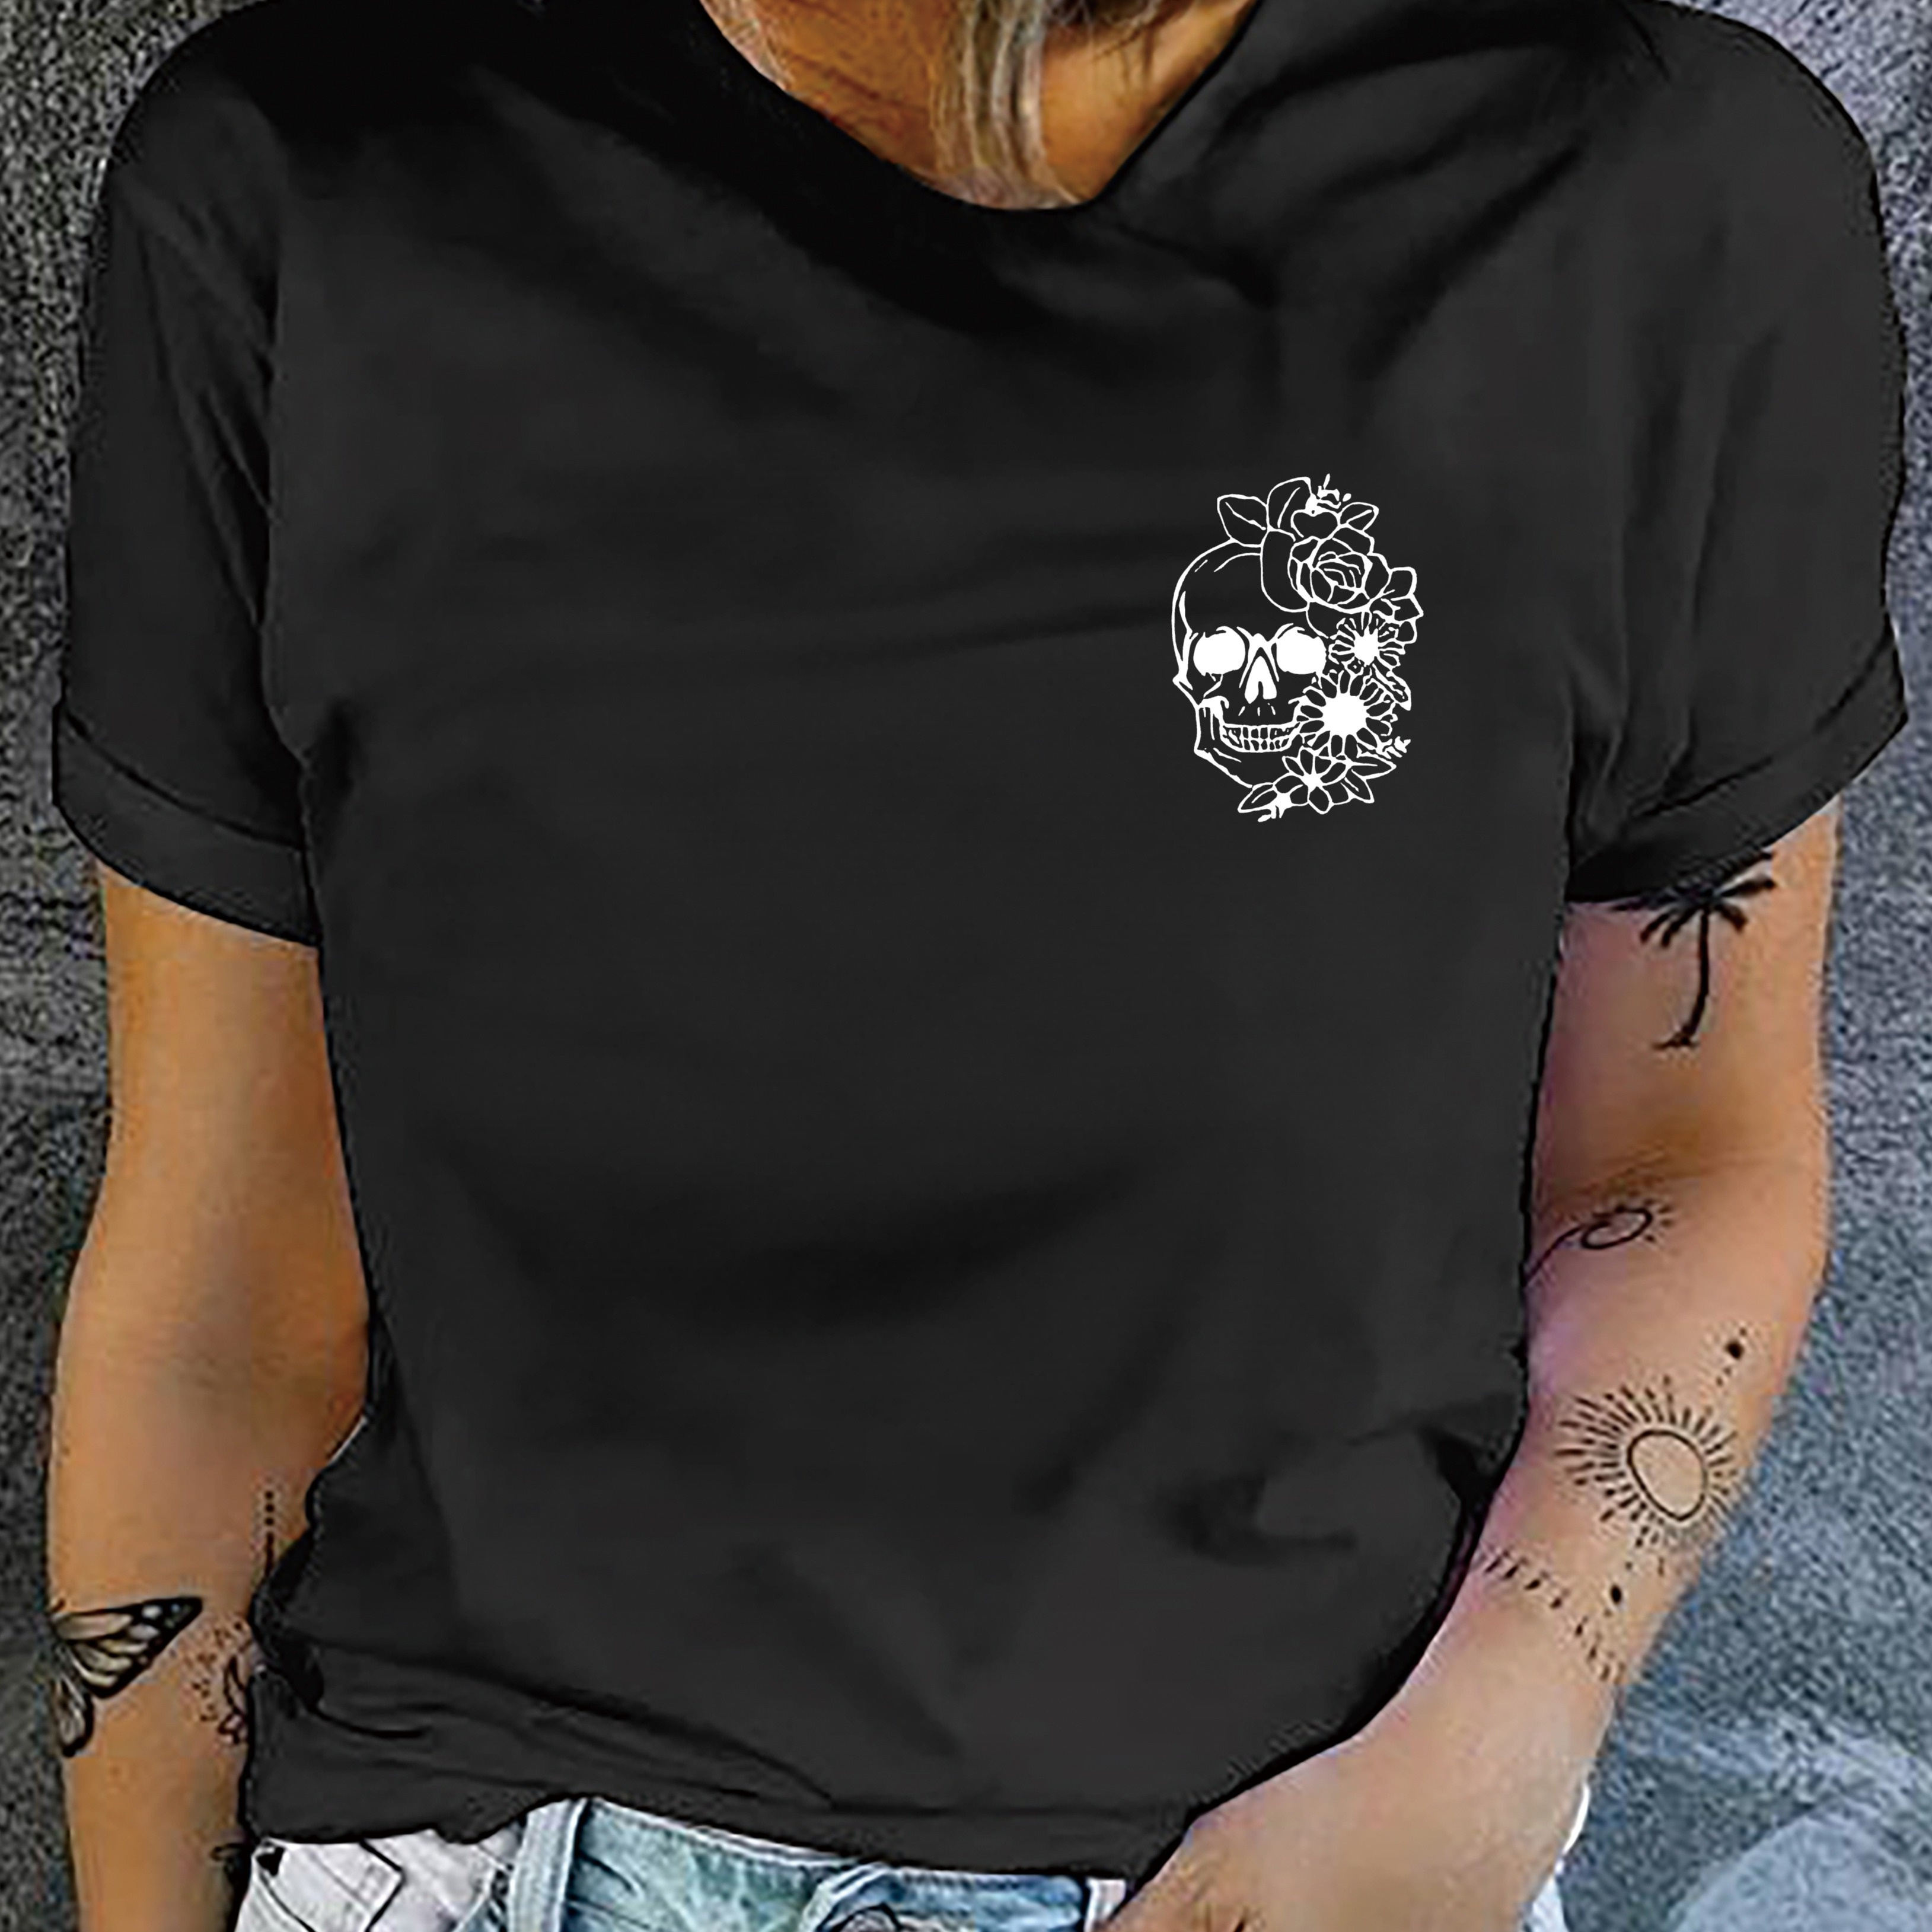 

Skull Print T-shirt, Short Sleeve Crew Neck Casual Top For Summer & Spring, Women's Clothing